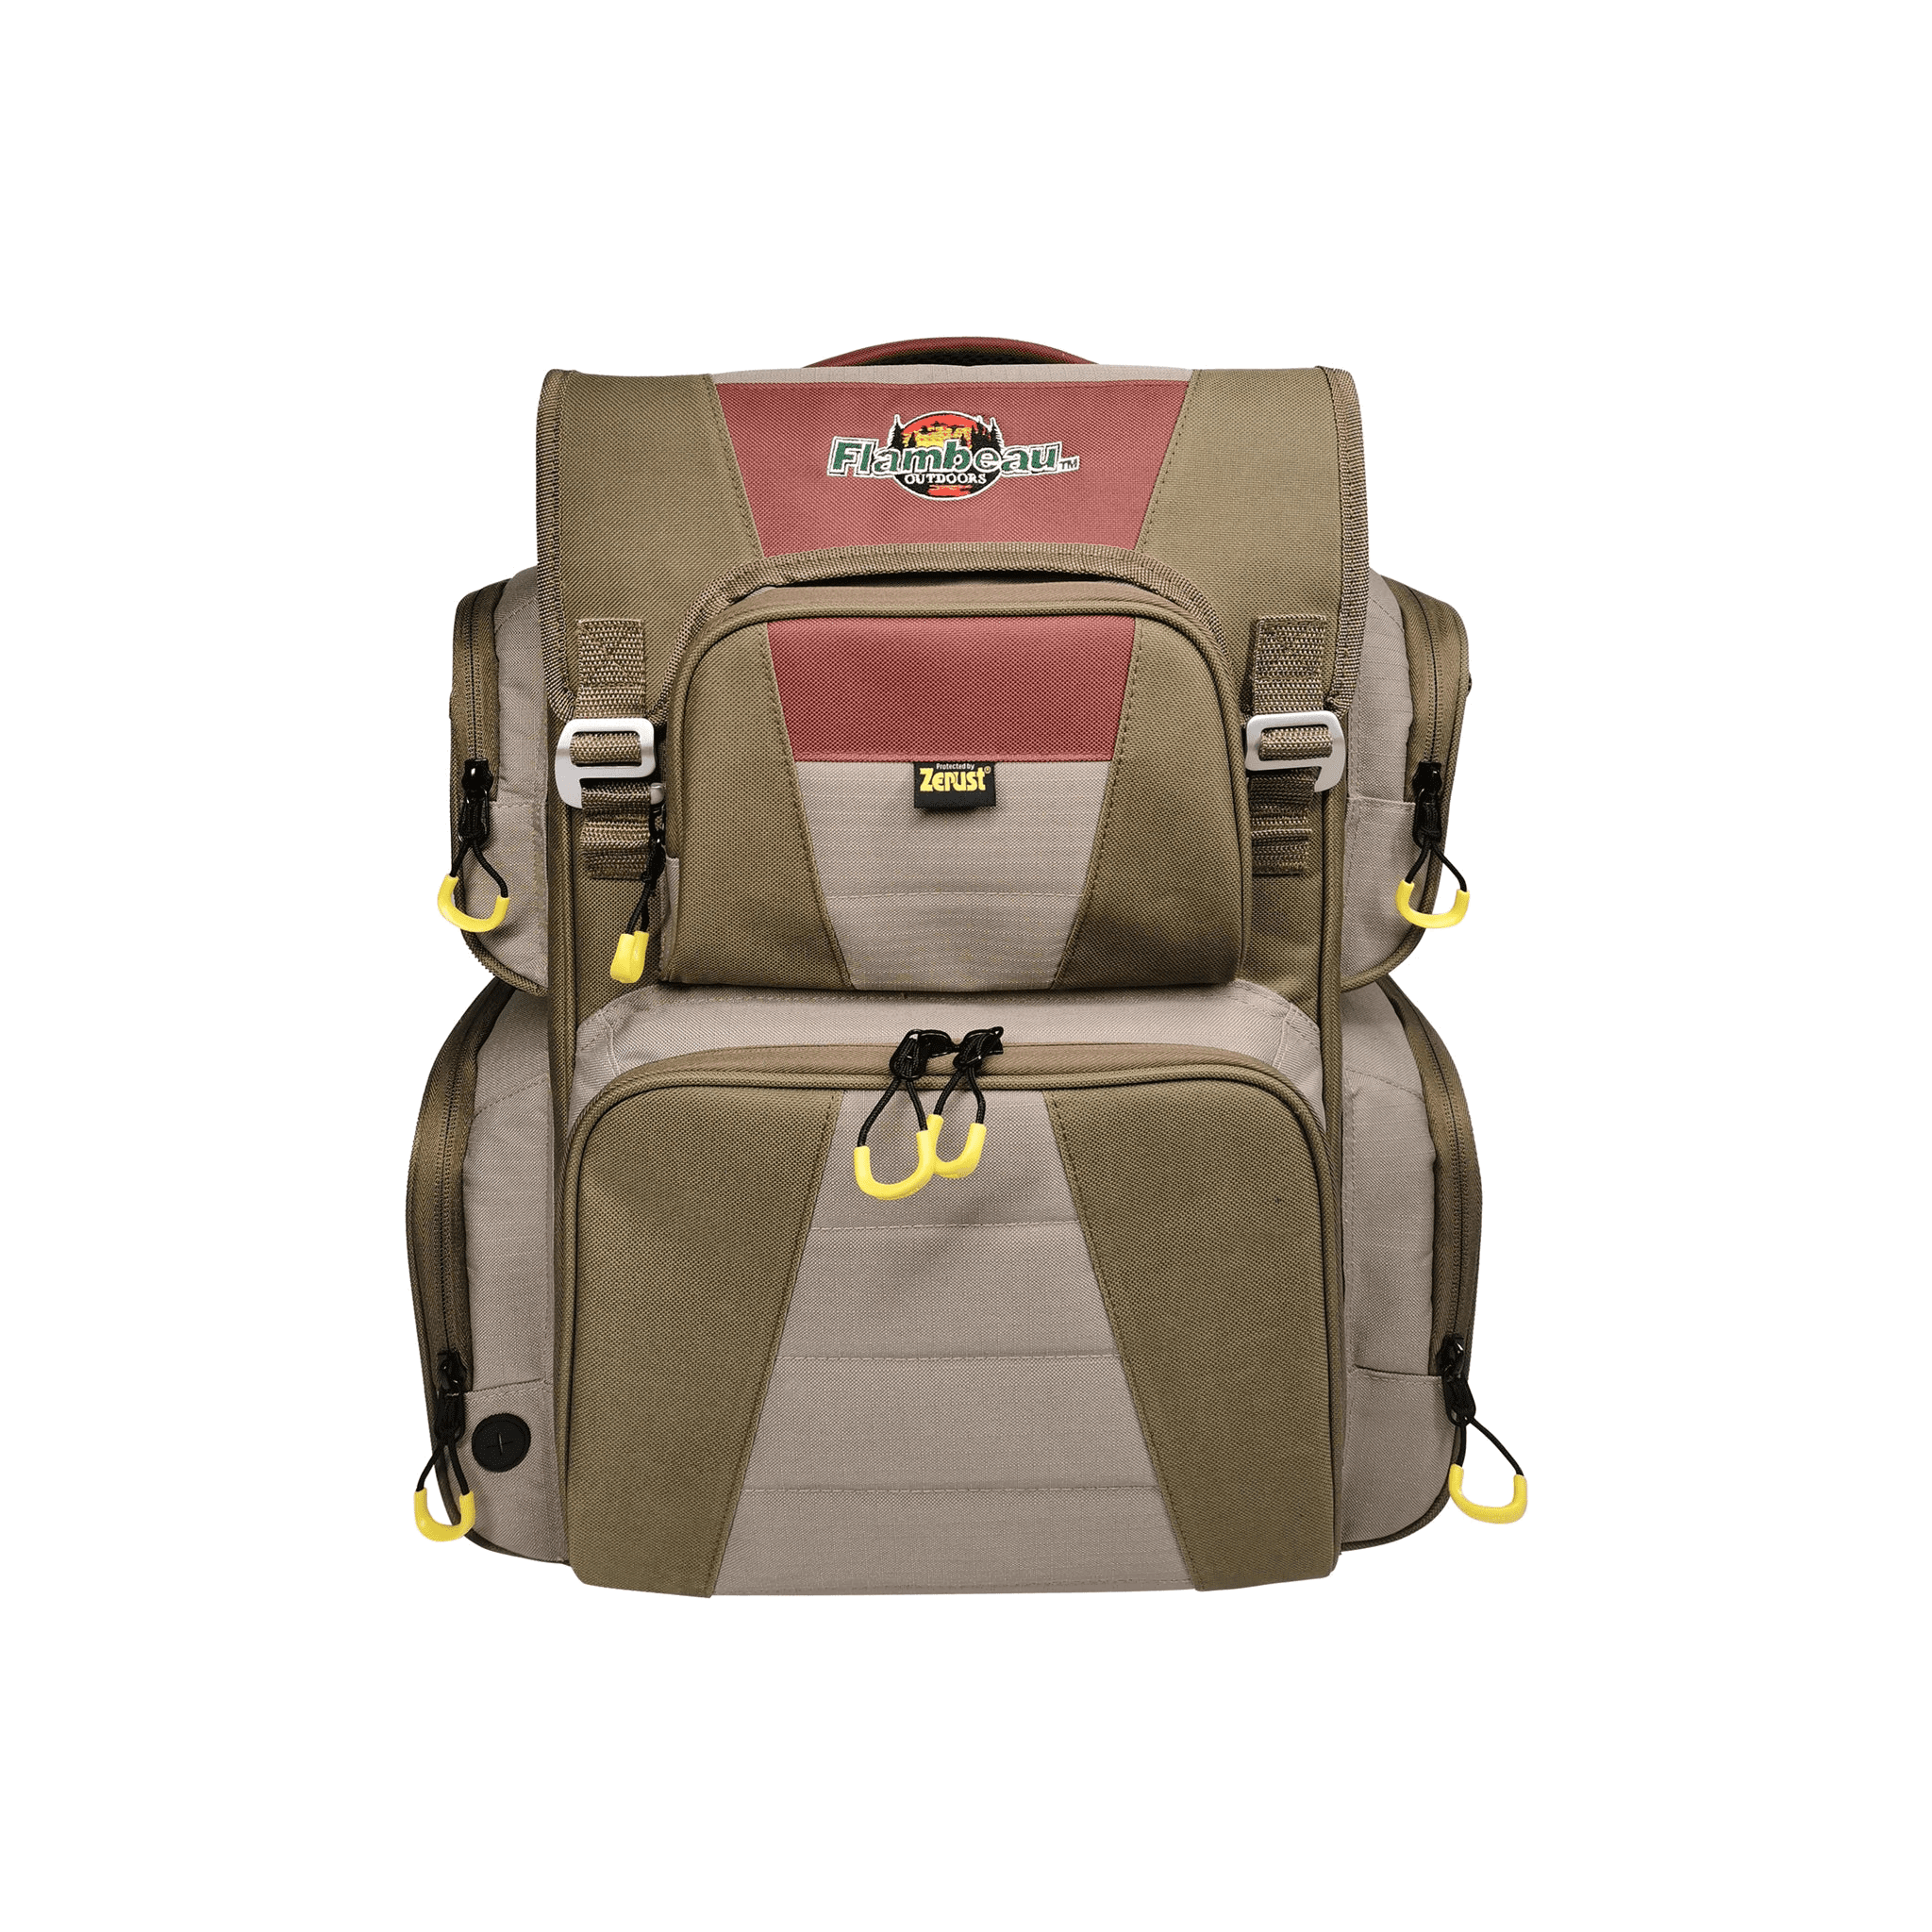 Evolution Outdoor 5007 Heritage Zerust Backpack FL40004 - Tackle Boxes & Bags